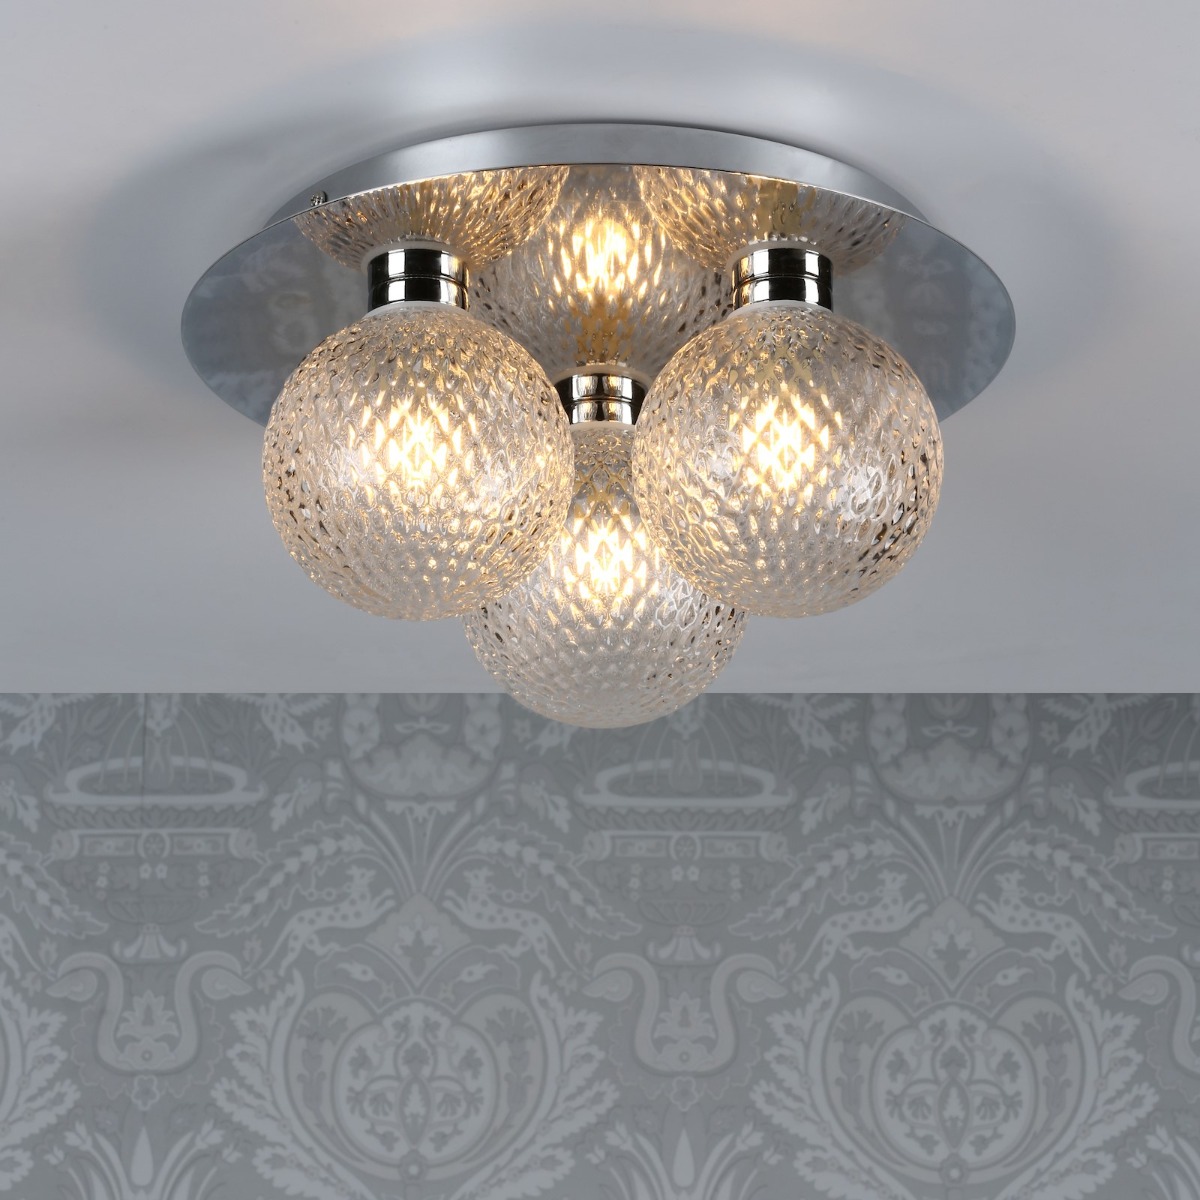 Image of Laura Ashley Prague Bathroom 3 Light Flush Ceiling Light In Polished Chrome With Glass Shades IP44